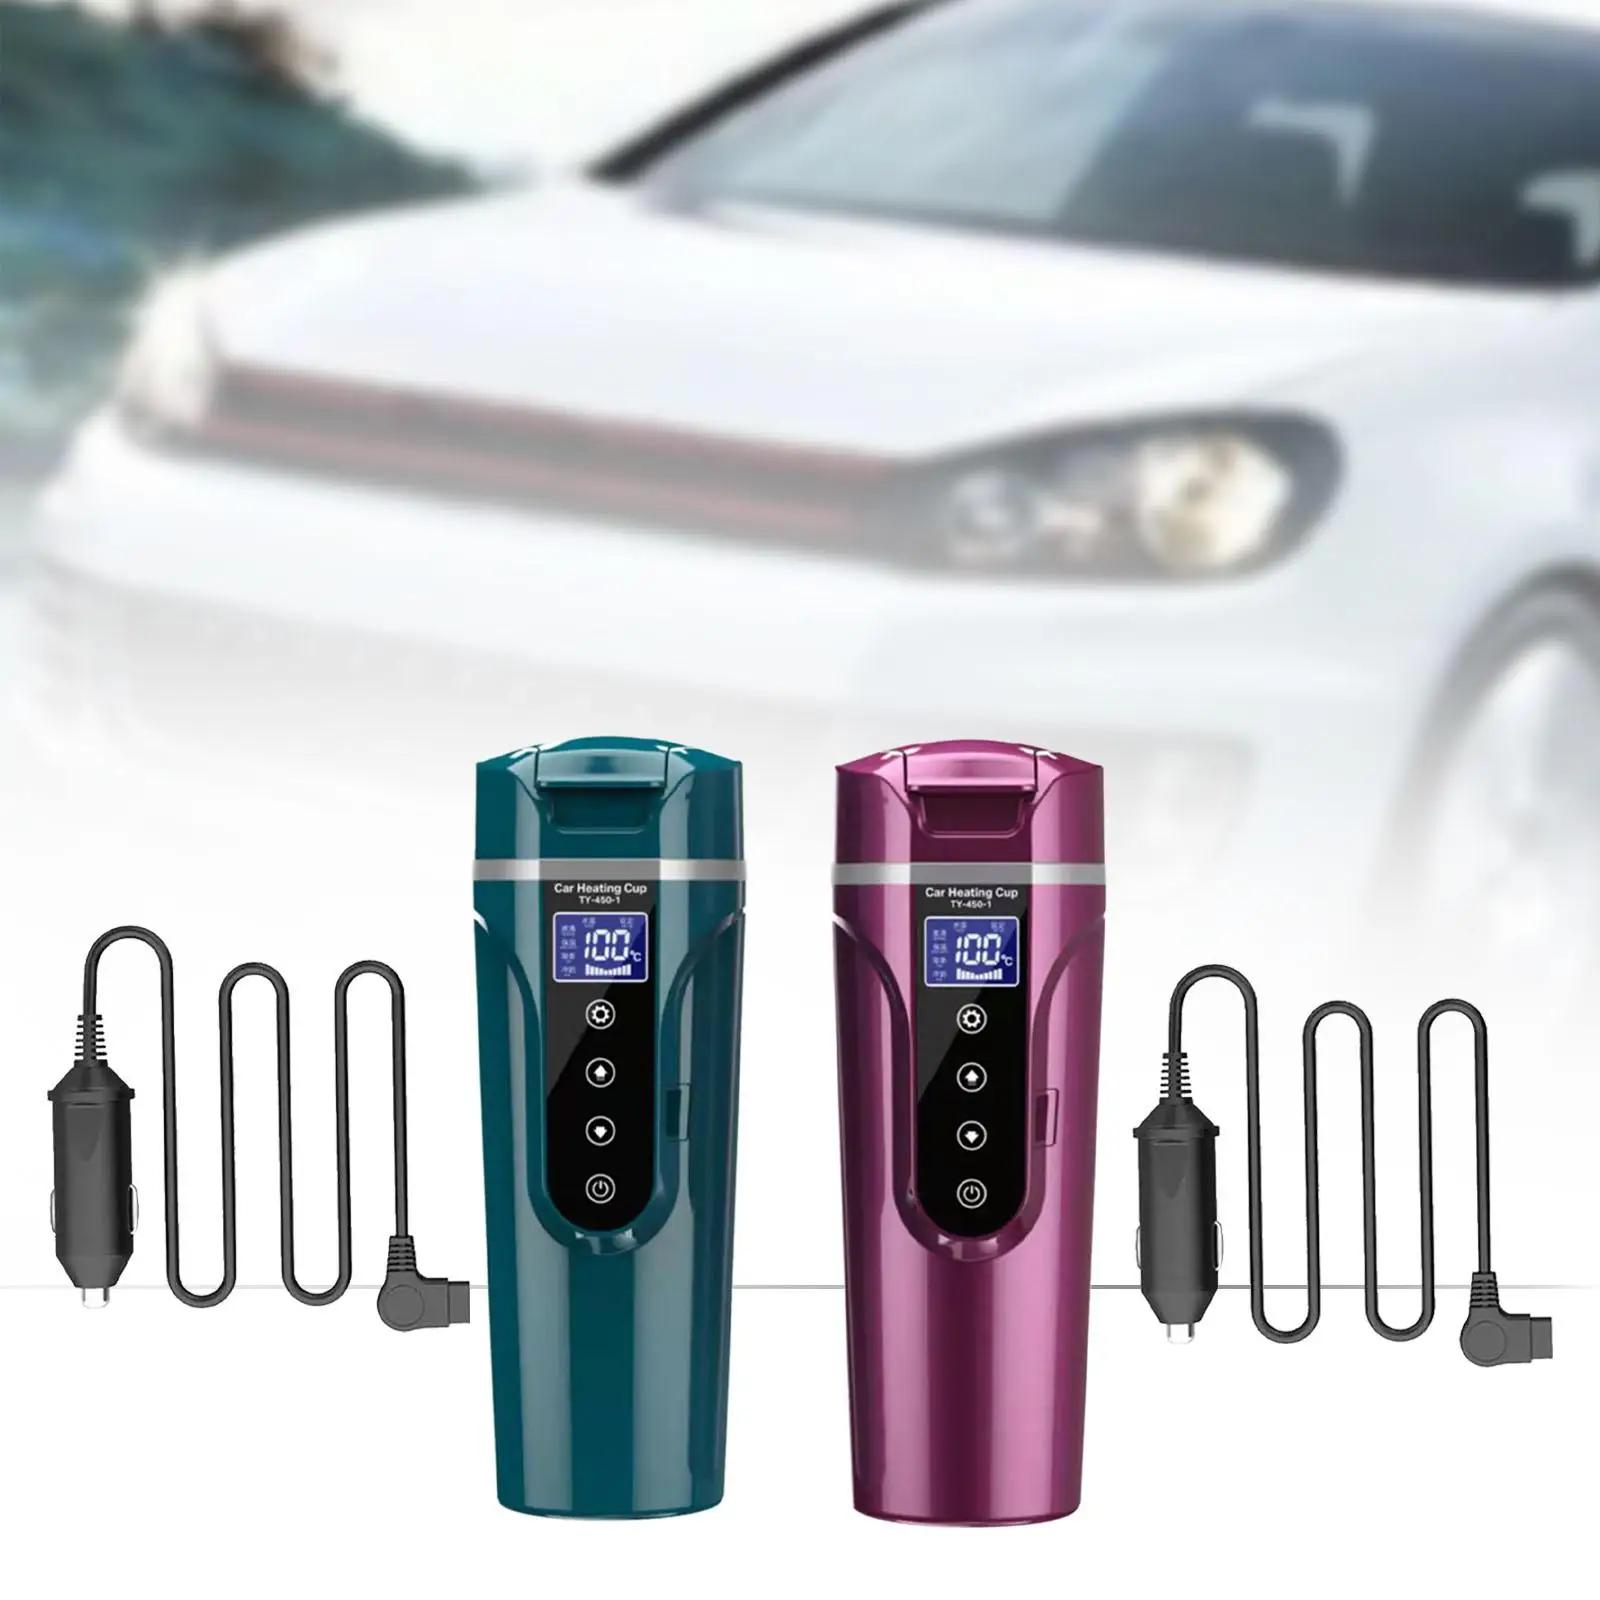 12V/24V Travel Car Truck Kettle for Car Truck Coffee Tea Cup Fast Boil Stainless Steel Car Heating Mug for Tea Water Outdoor Car